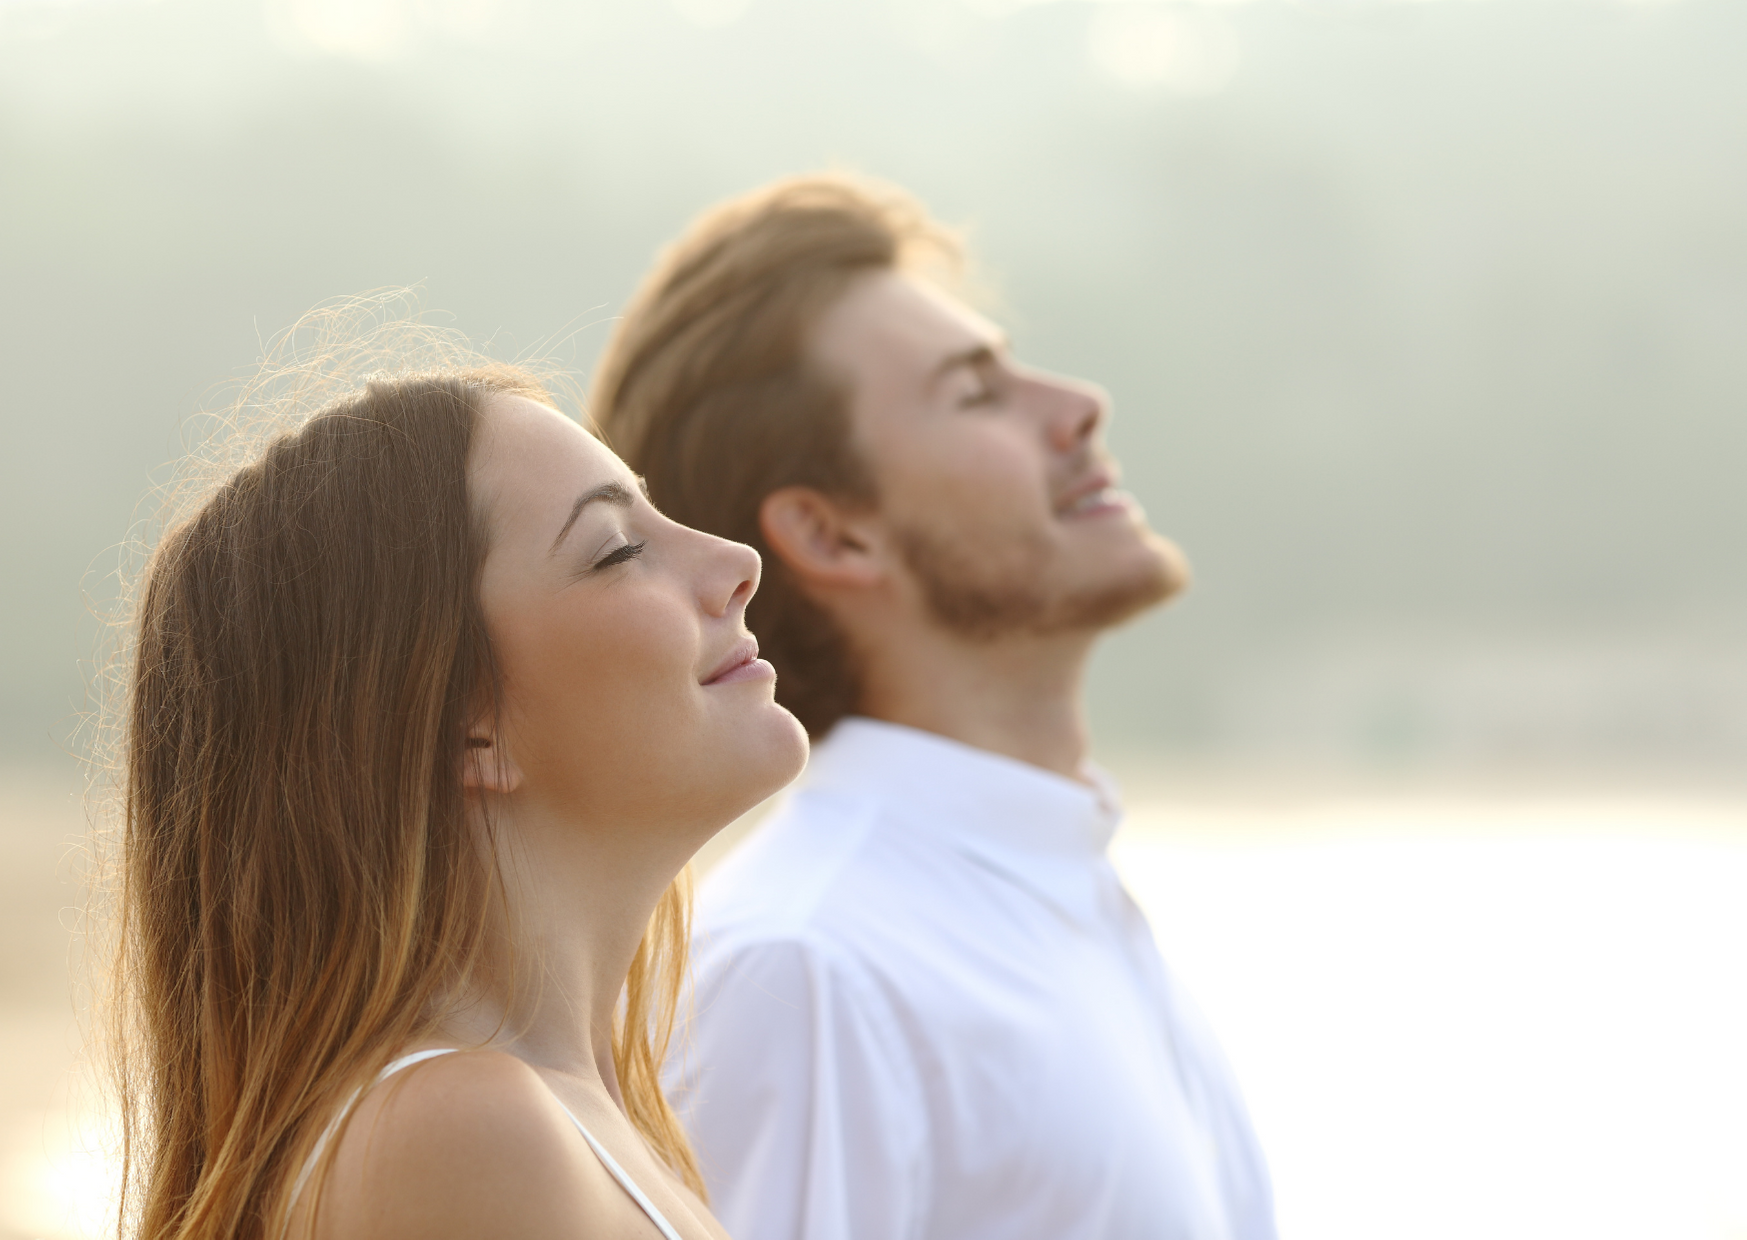 man and woman receiving the sun and smiling